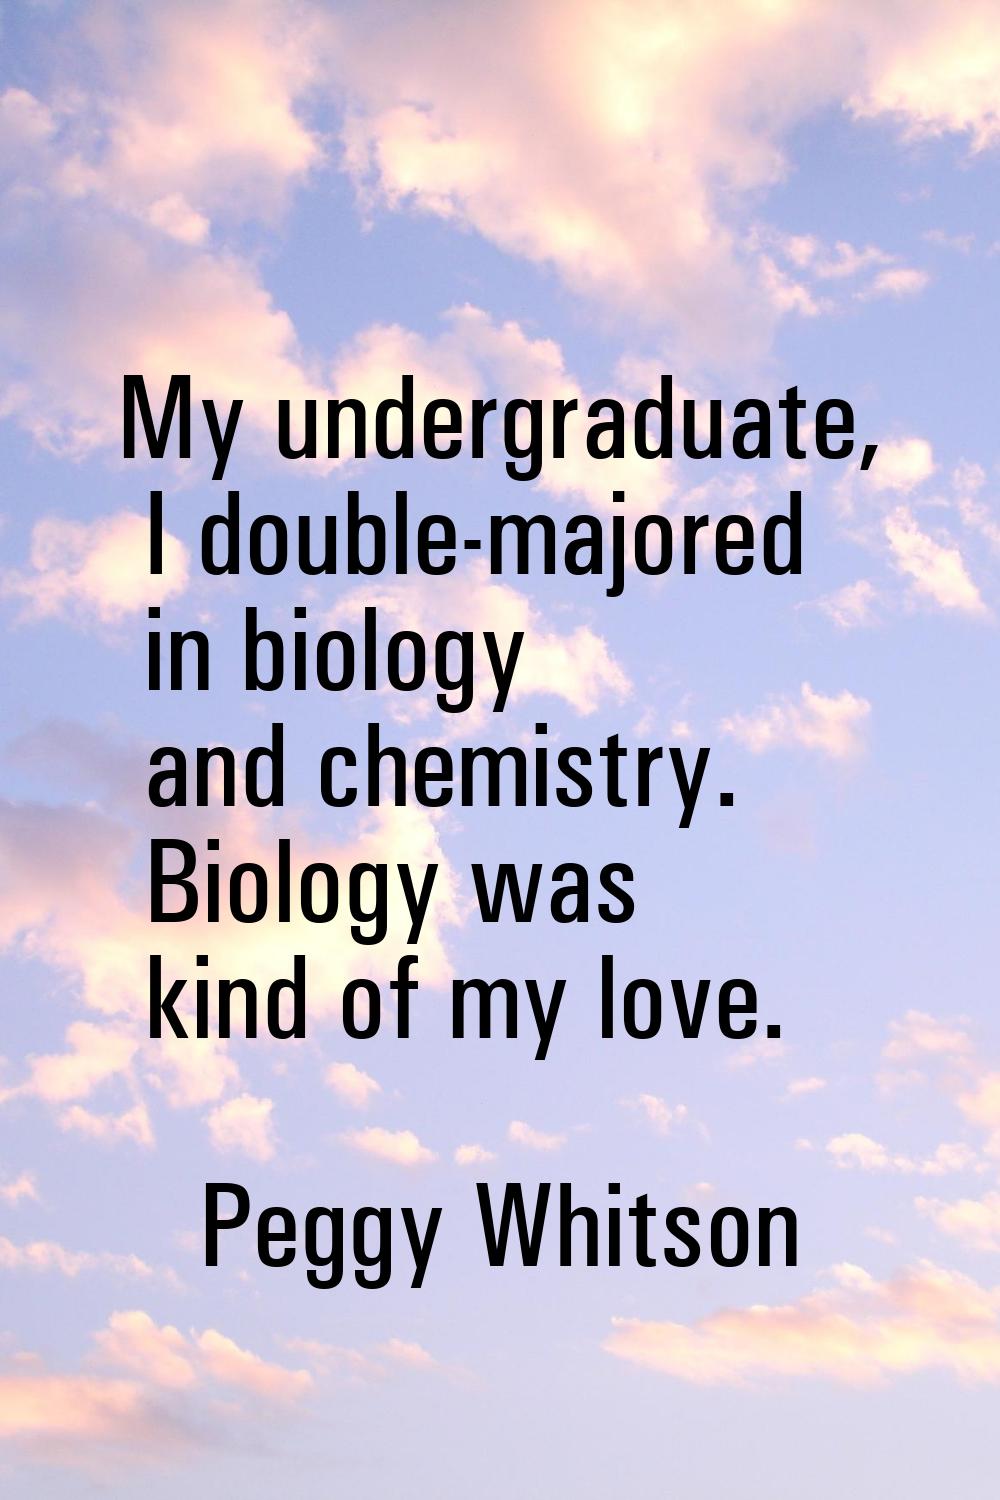 My undergraduate, I double-majored in biology and chemistry. Biology was kind of my love.